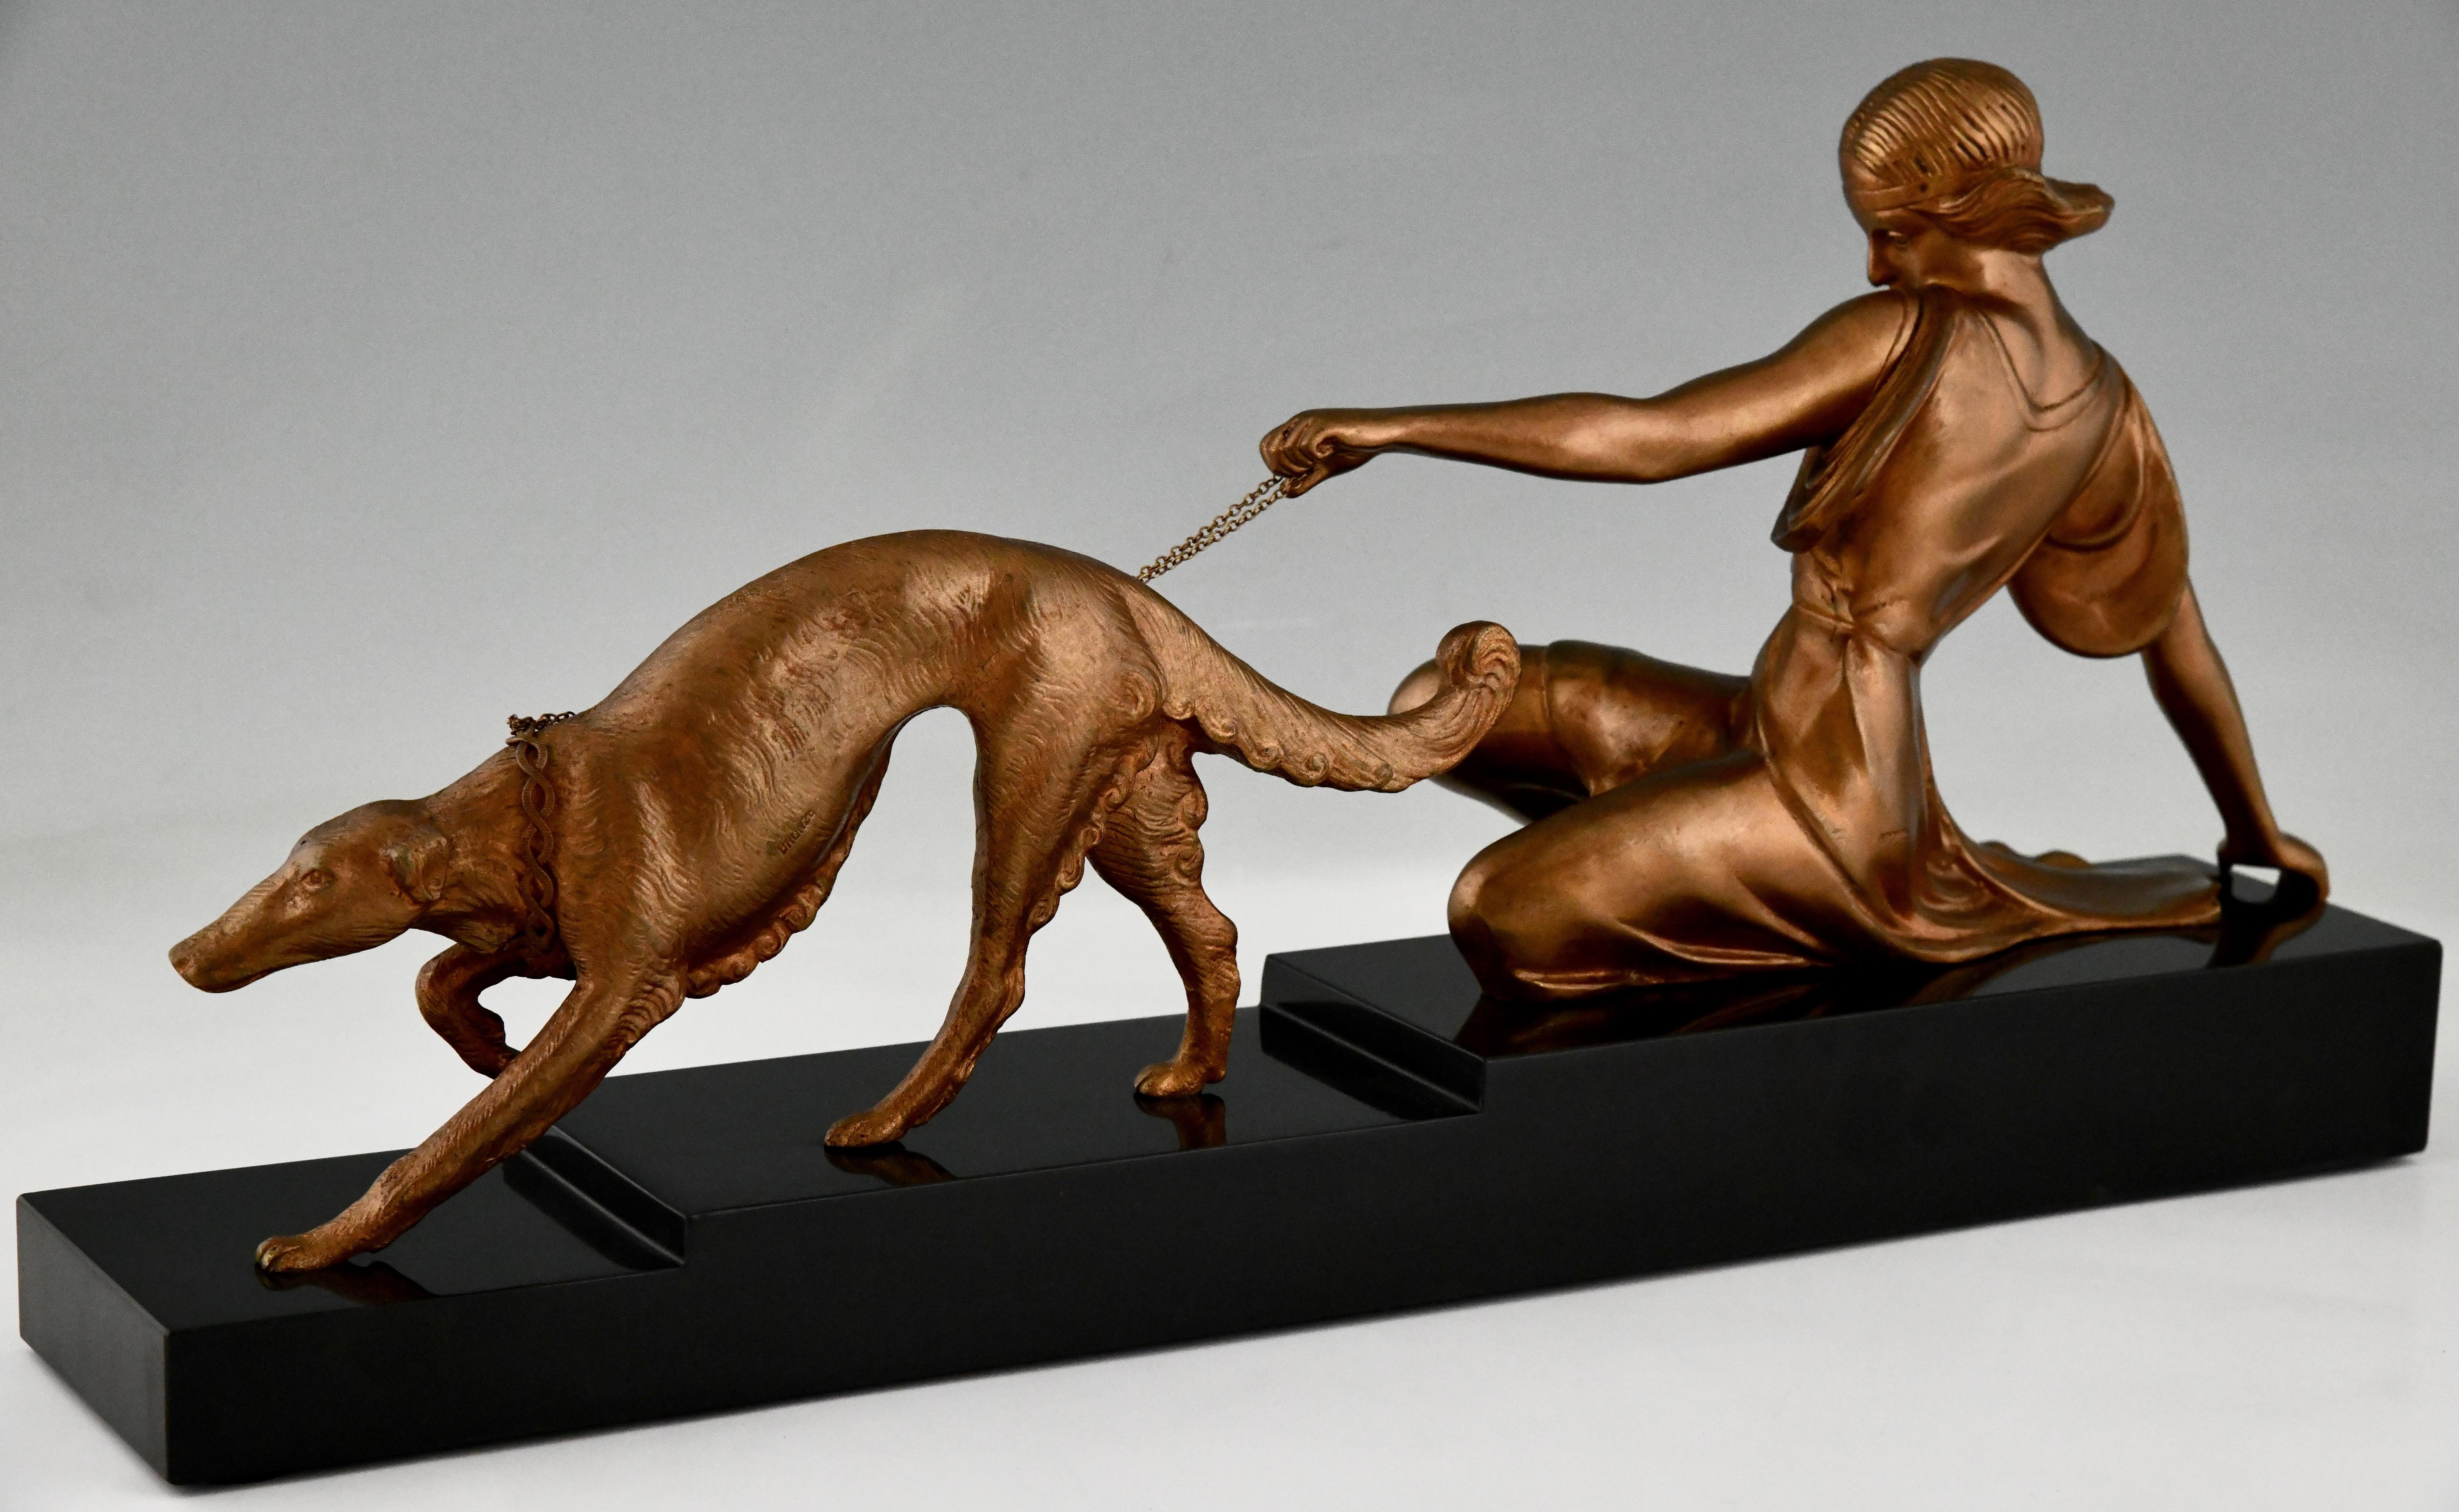 Patinated Art Deco Bronze Sculpture Lady with Greyhound Dog by Armand Godard 1930 For Sale